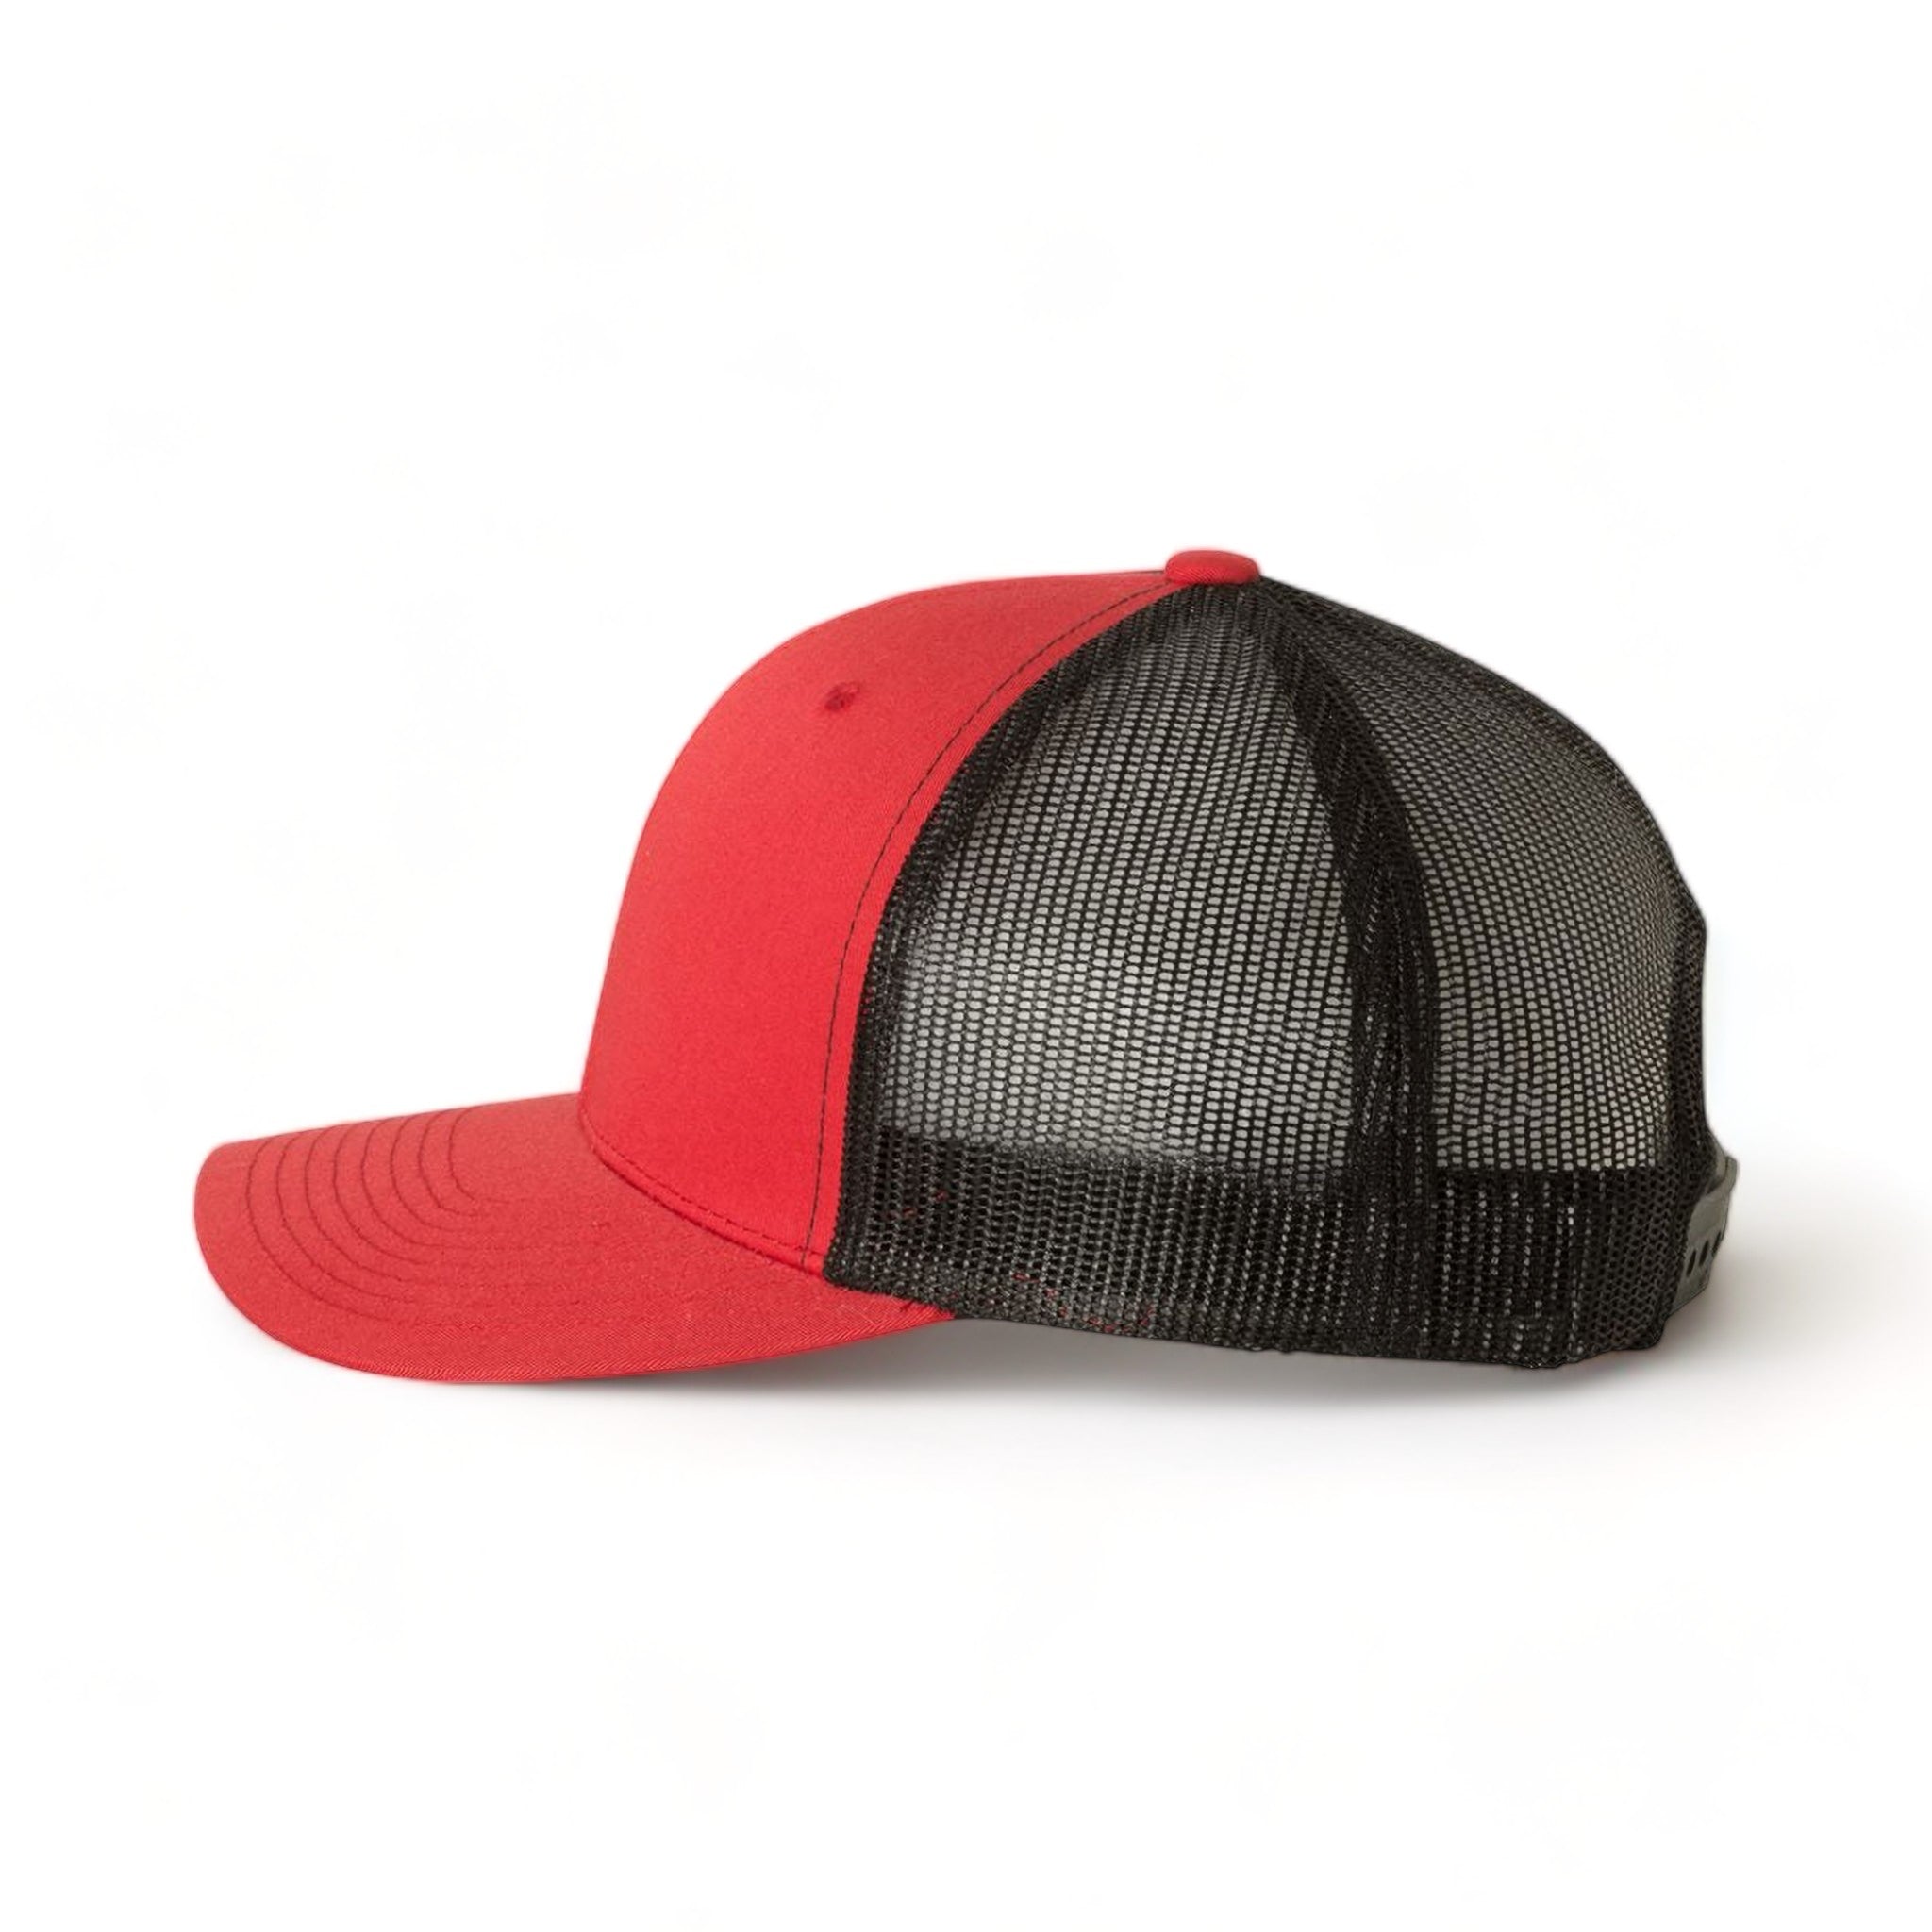 Side view of YP Classics 6606 custom hat in red and black